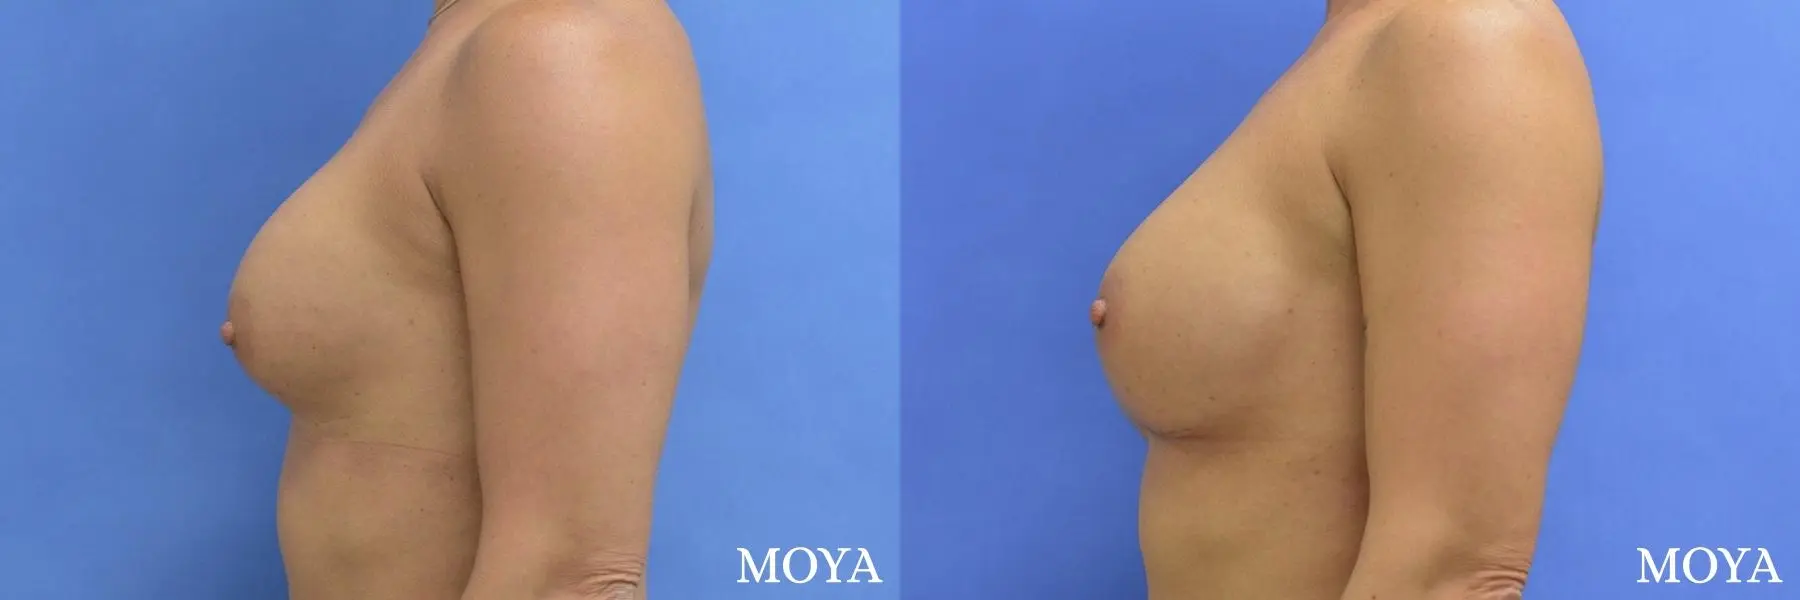 Breast Implant Exchange: Patient 4 - Before and After 6